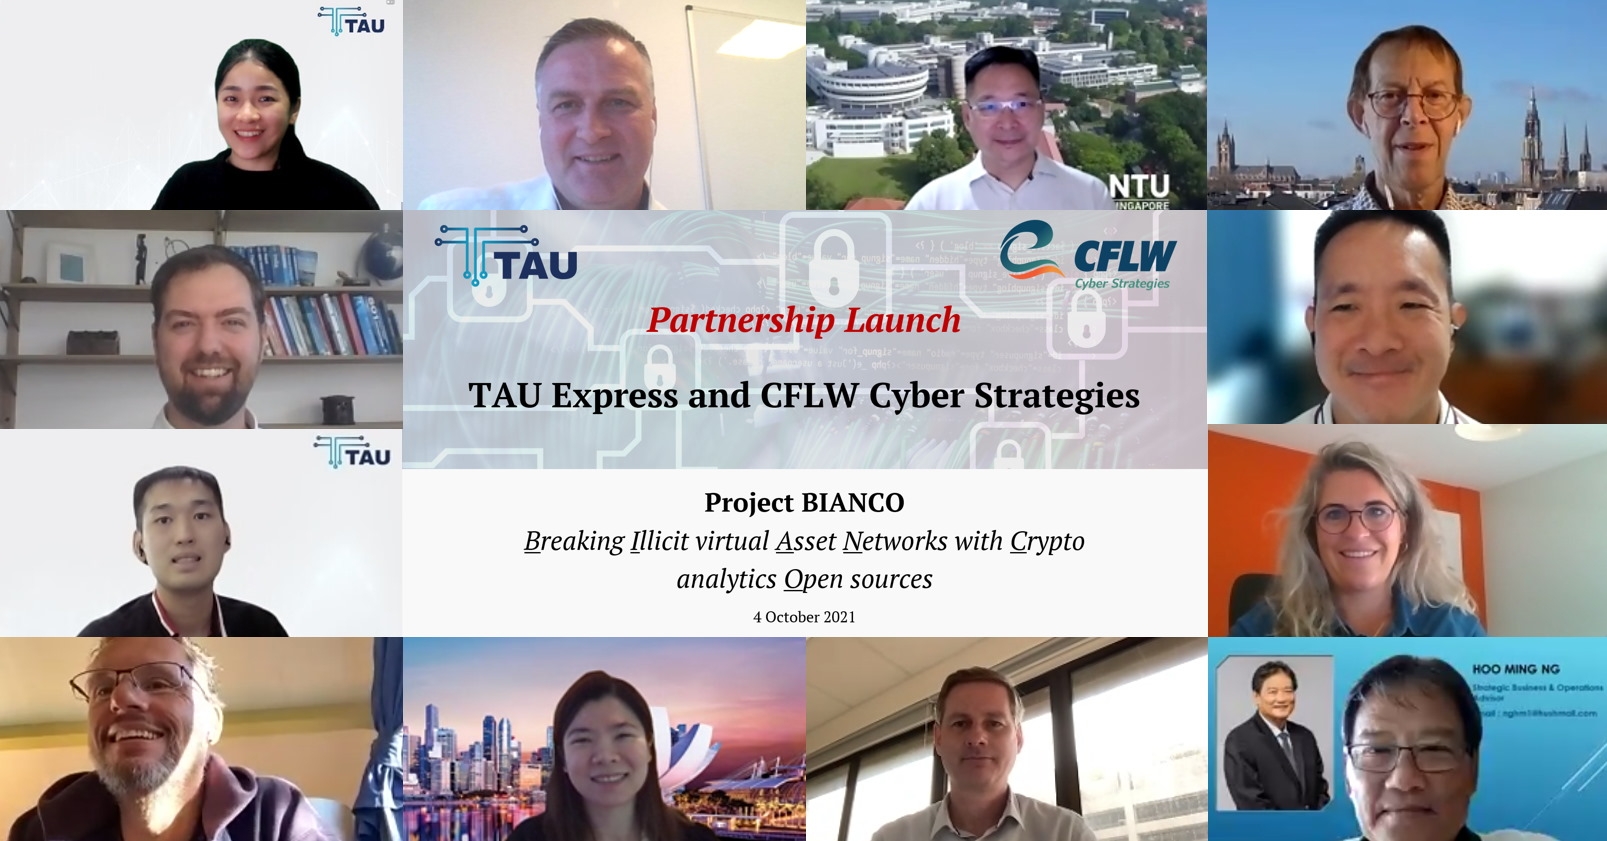 CFLW and TAU Collaborate on Artificial Intelligence to Combat High-Tech Financial Crime